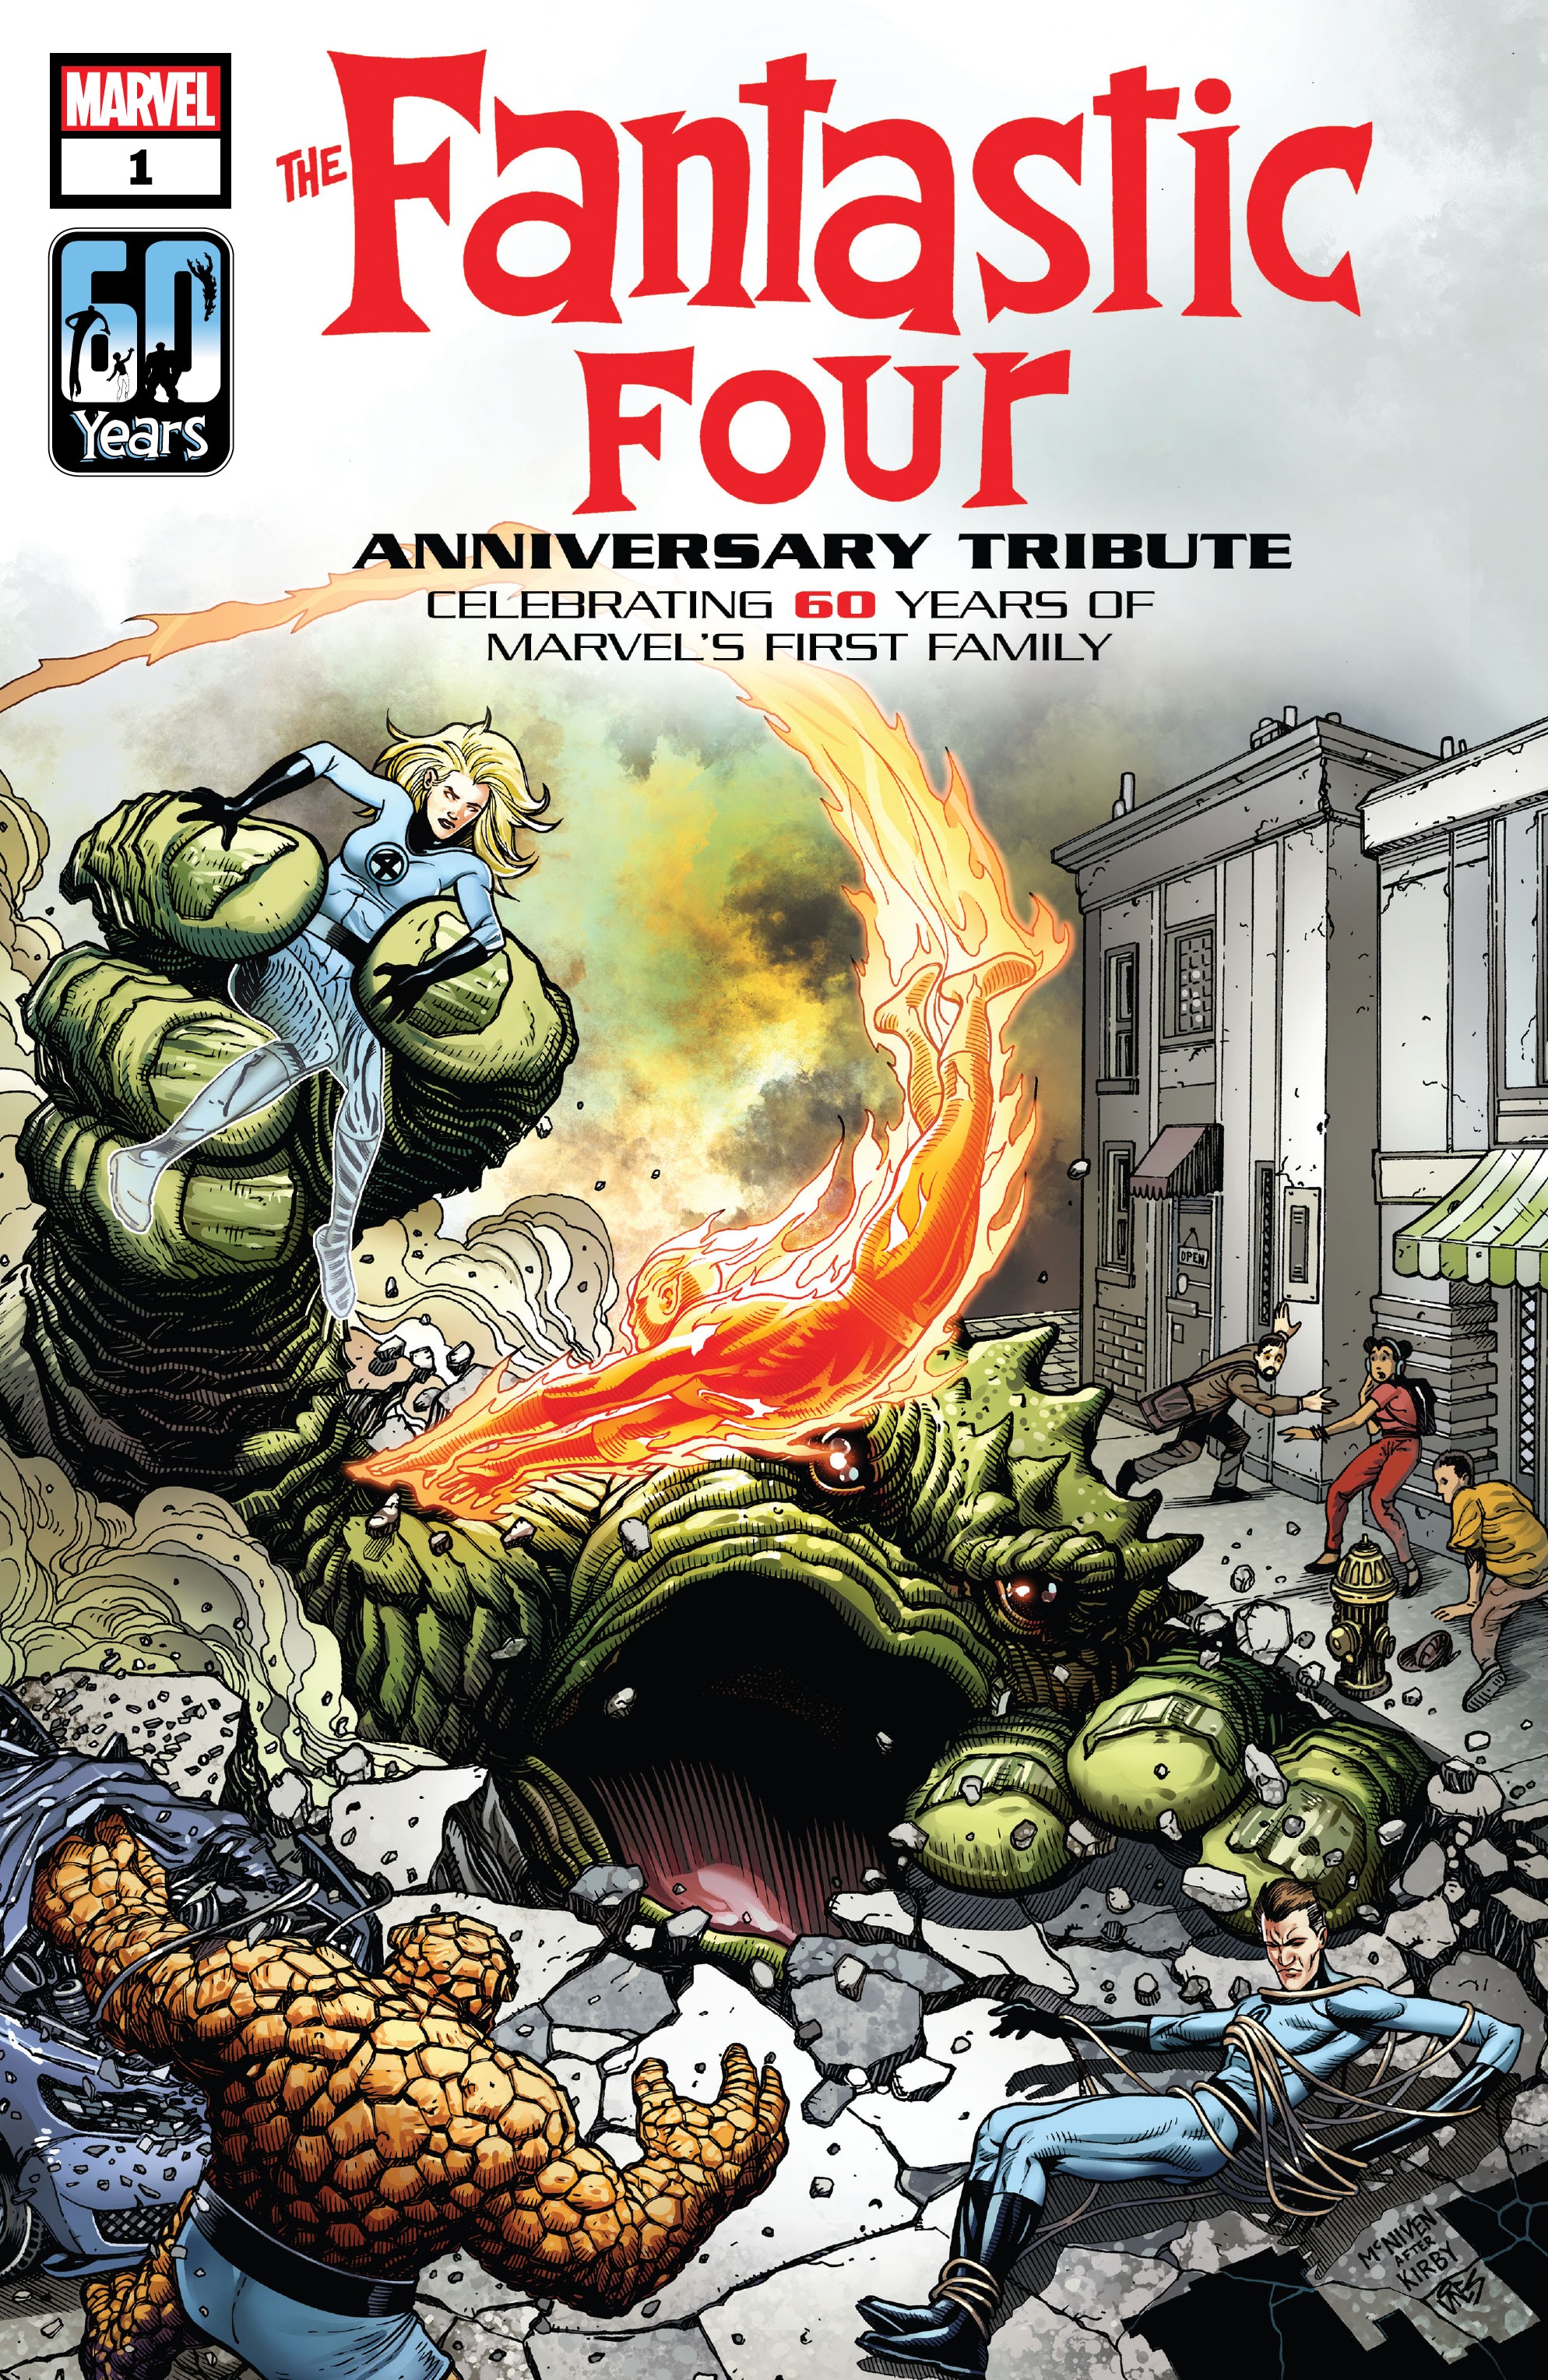 Read online The Fantastic Four Anniversary Tribute comic -  Issue #1 - 1